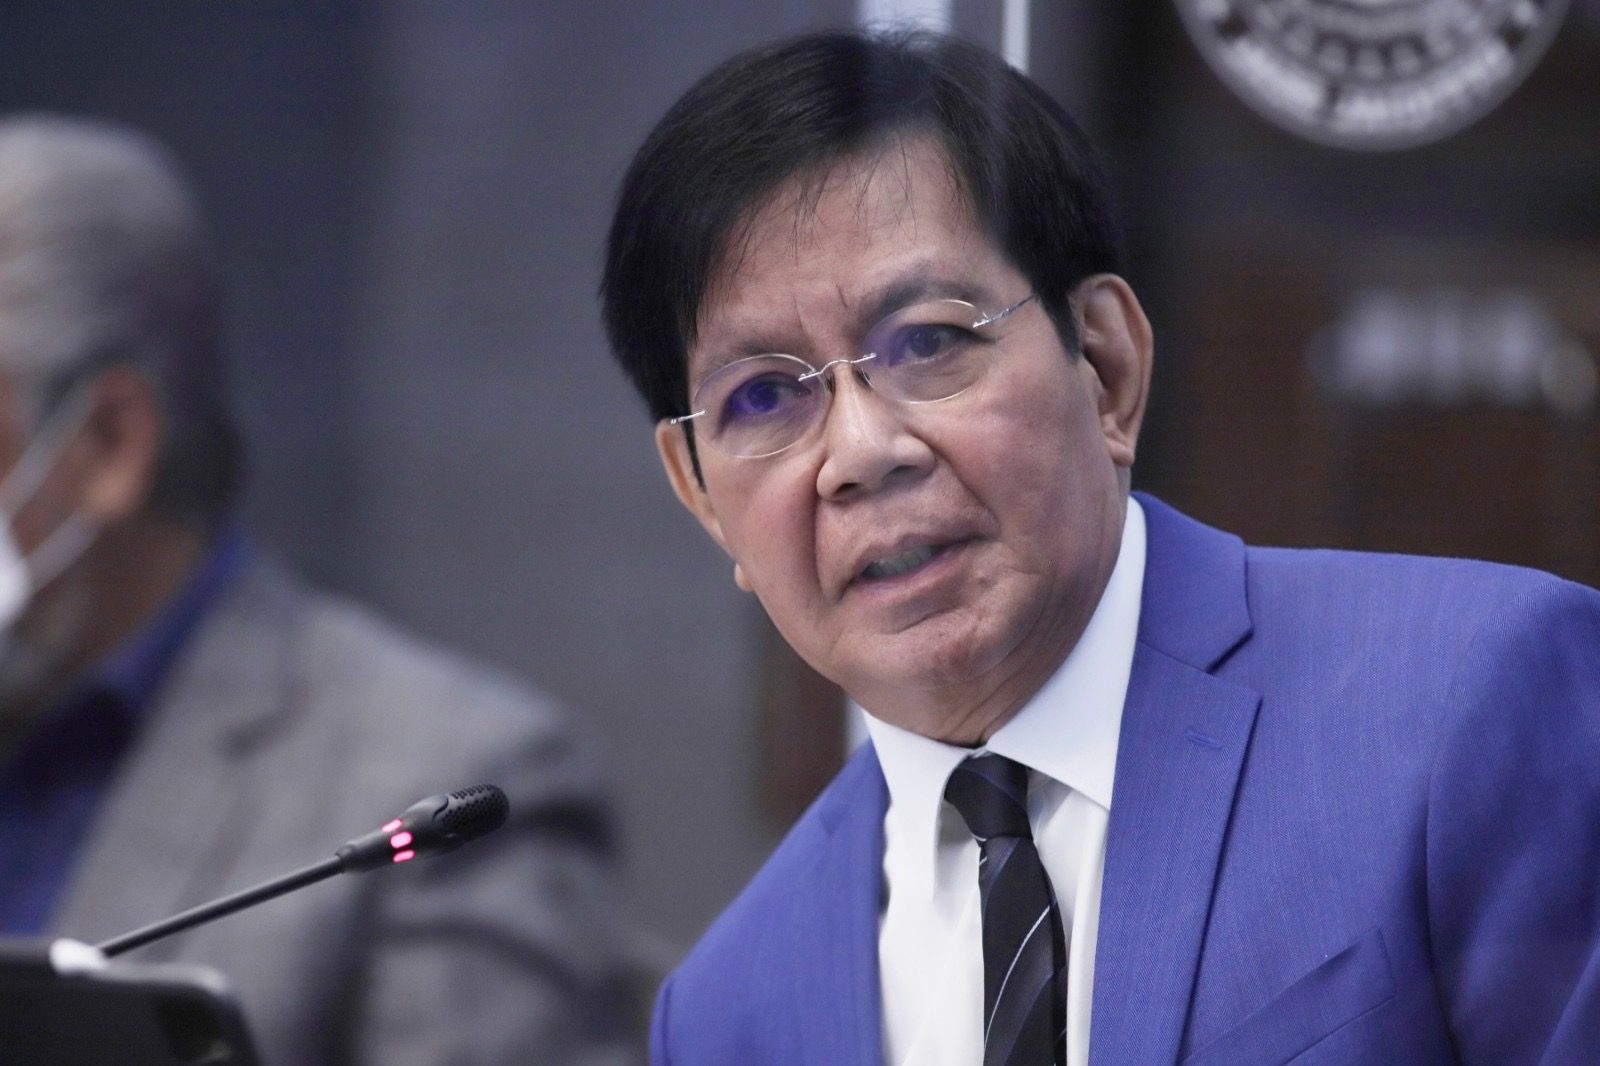 Lacson wants transparency after spotting ‘questionable realignments’ in budget bill